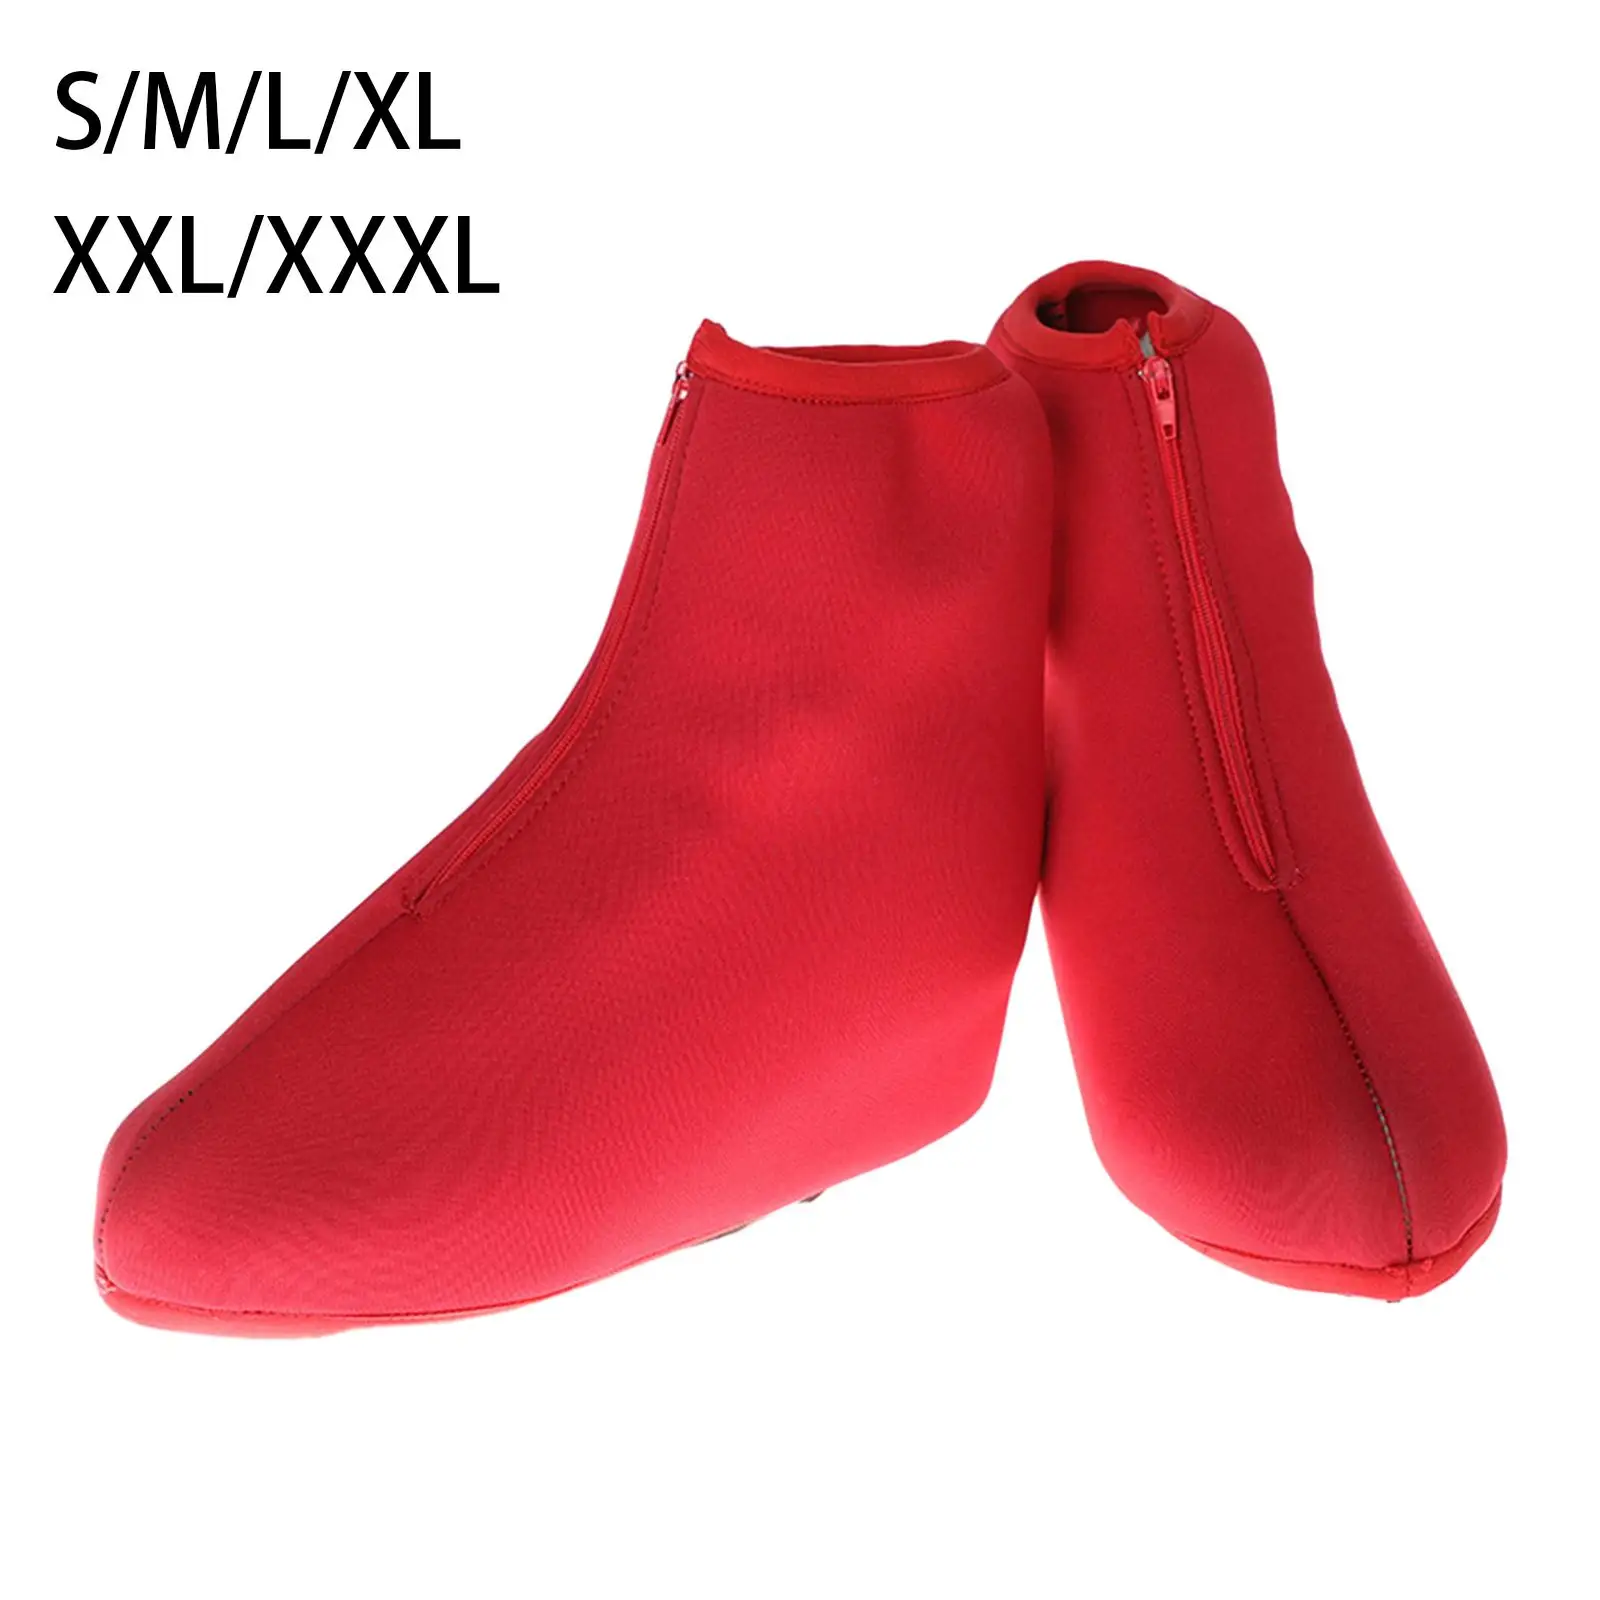 Ice Skate Boot Covers Shoes Protector Lightweight Winter Sports Men Women Protective for Ice Skating Figure Skates Roller Skates